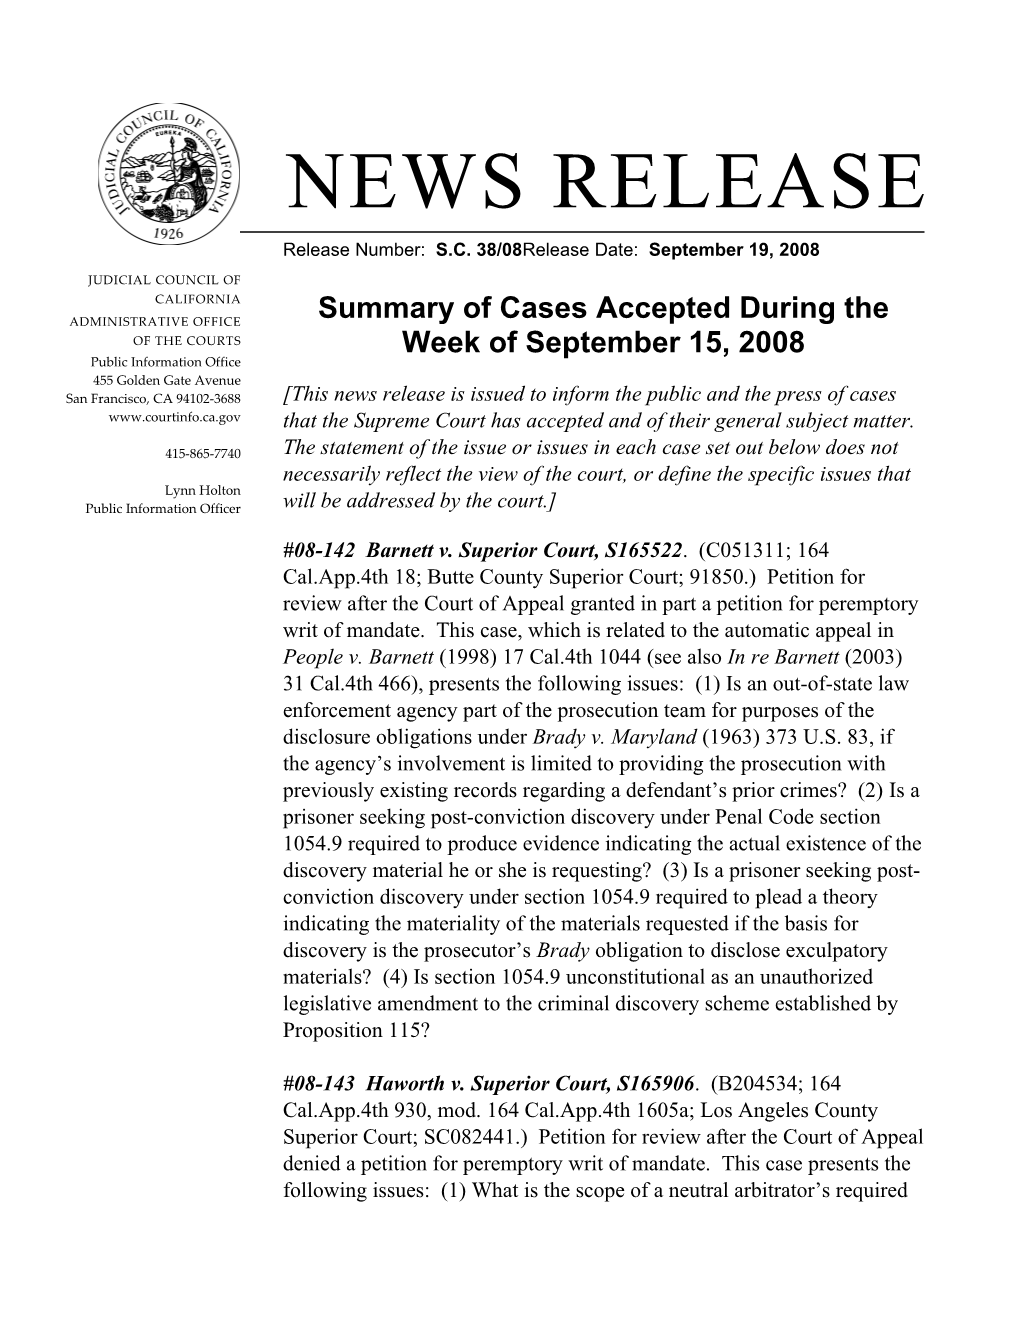 Summary of Cases Accepted During the Week of September 15, 2008